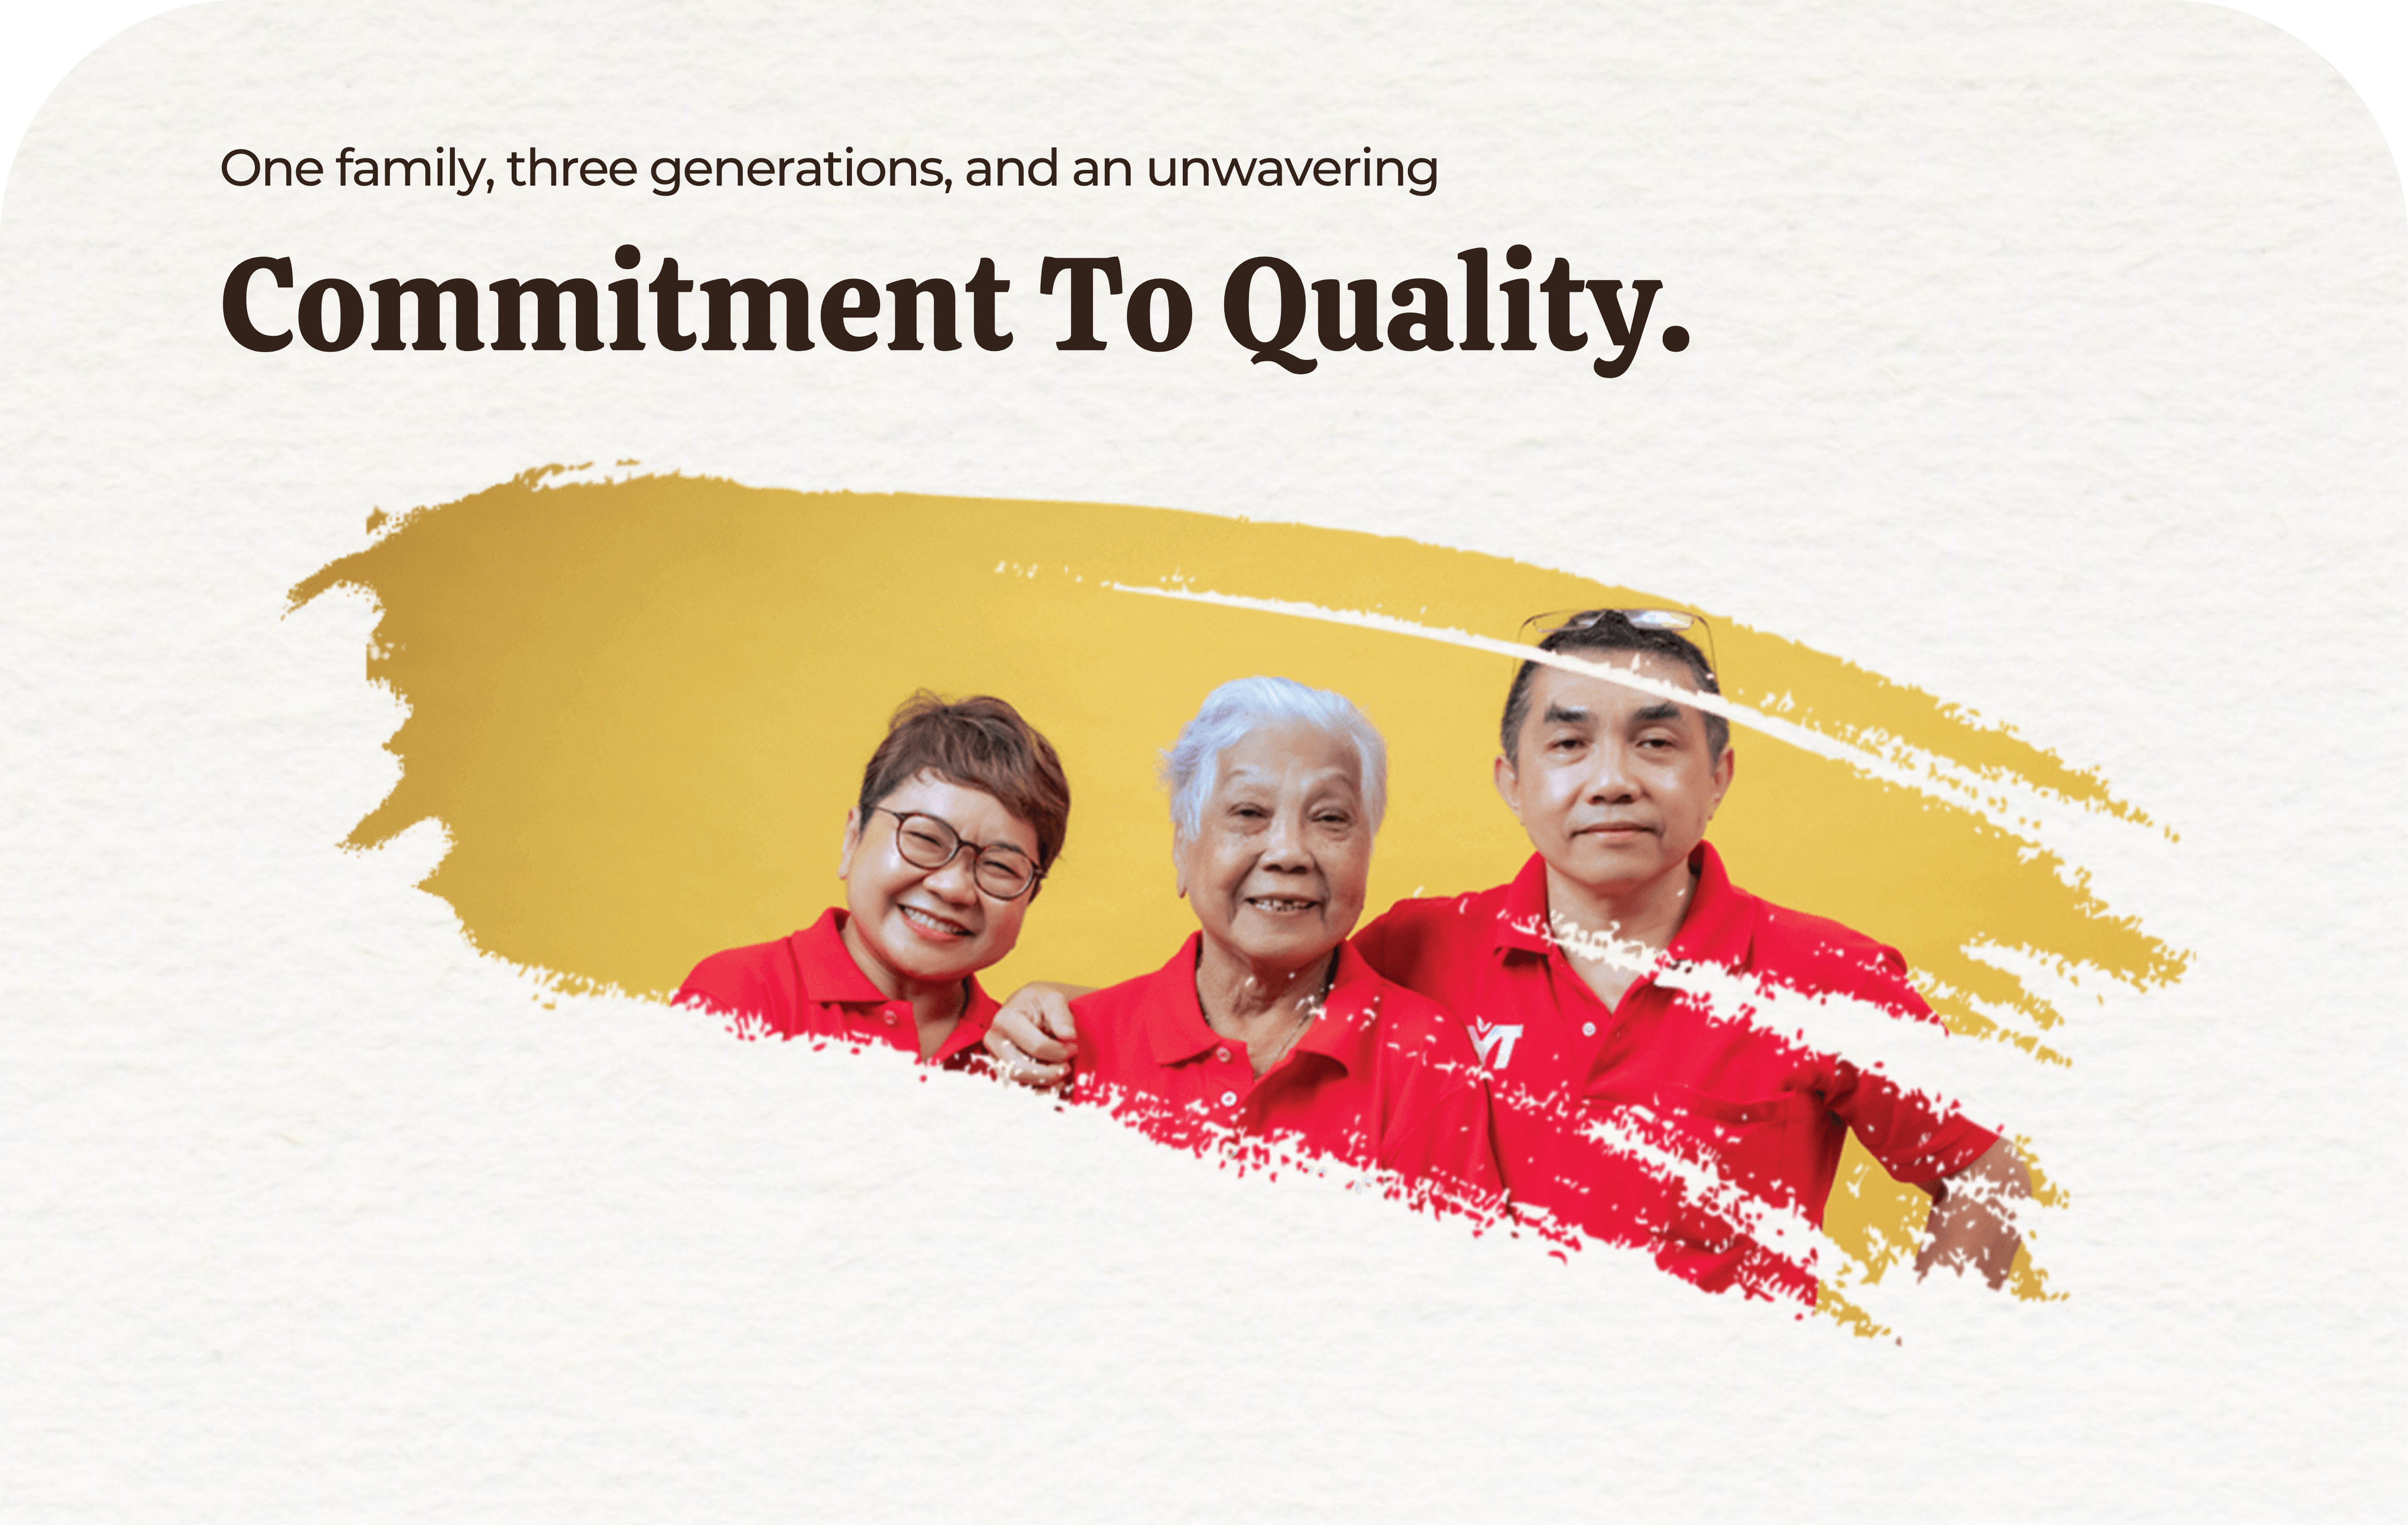 One family, three generations, and an unwavering commitment to quality.